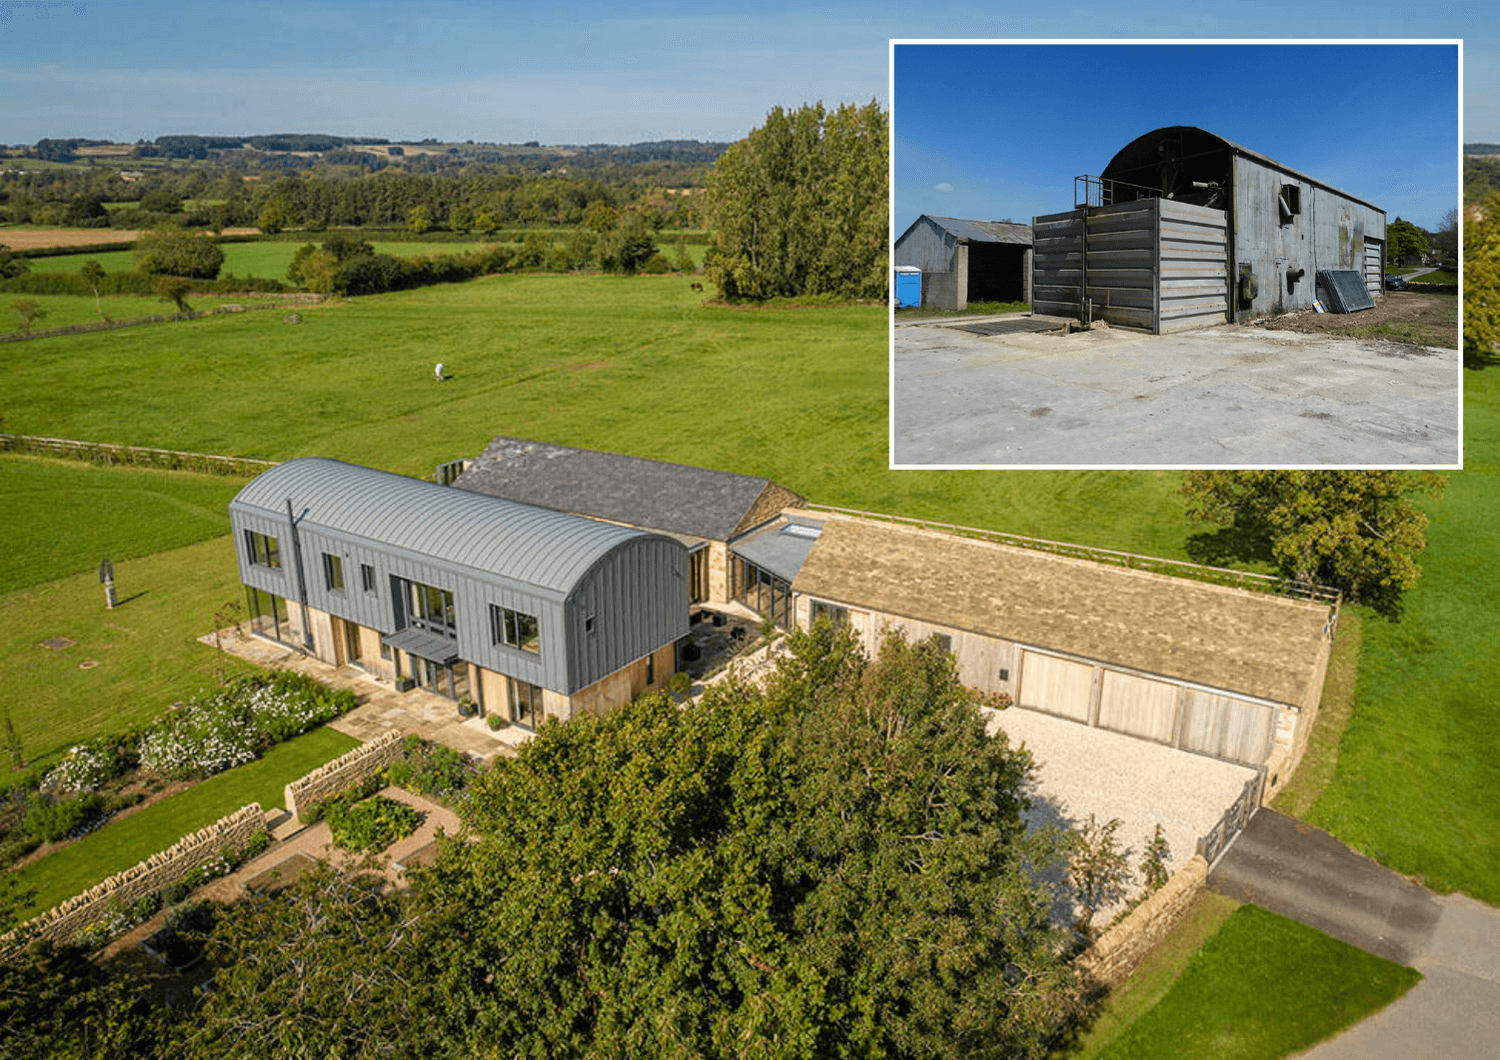 Barn conversion utilising existing agricultural structure